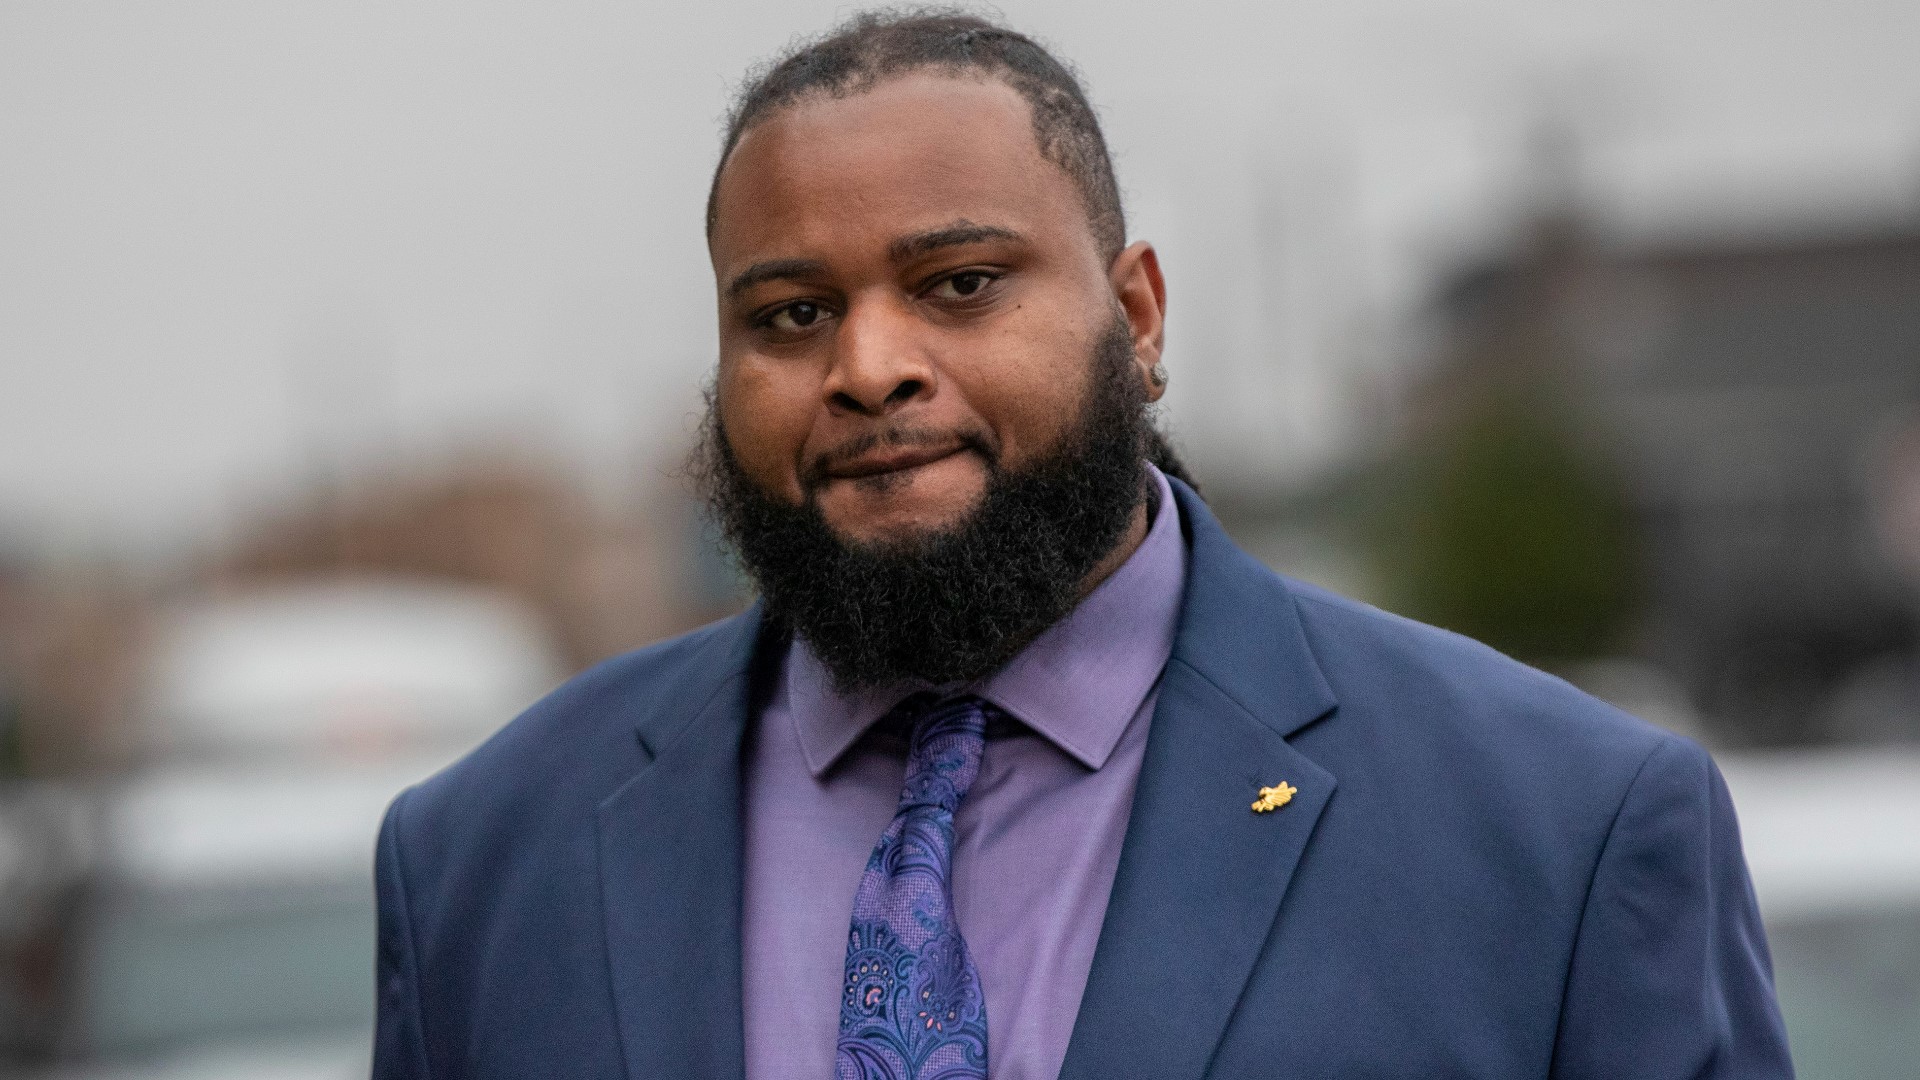 Cardell Hayes faces up to 40 years in prison.